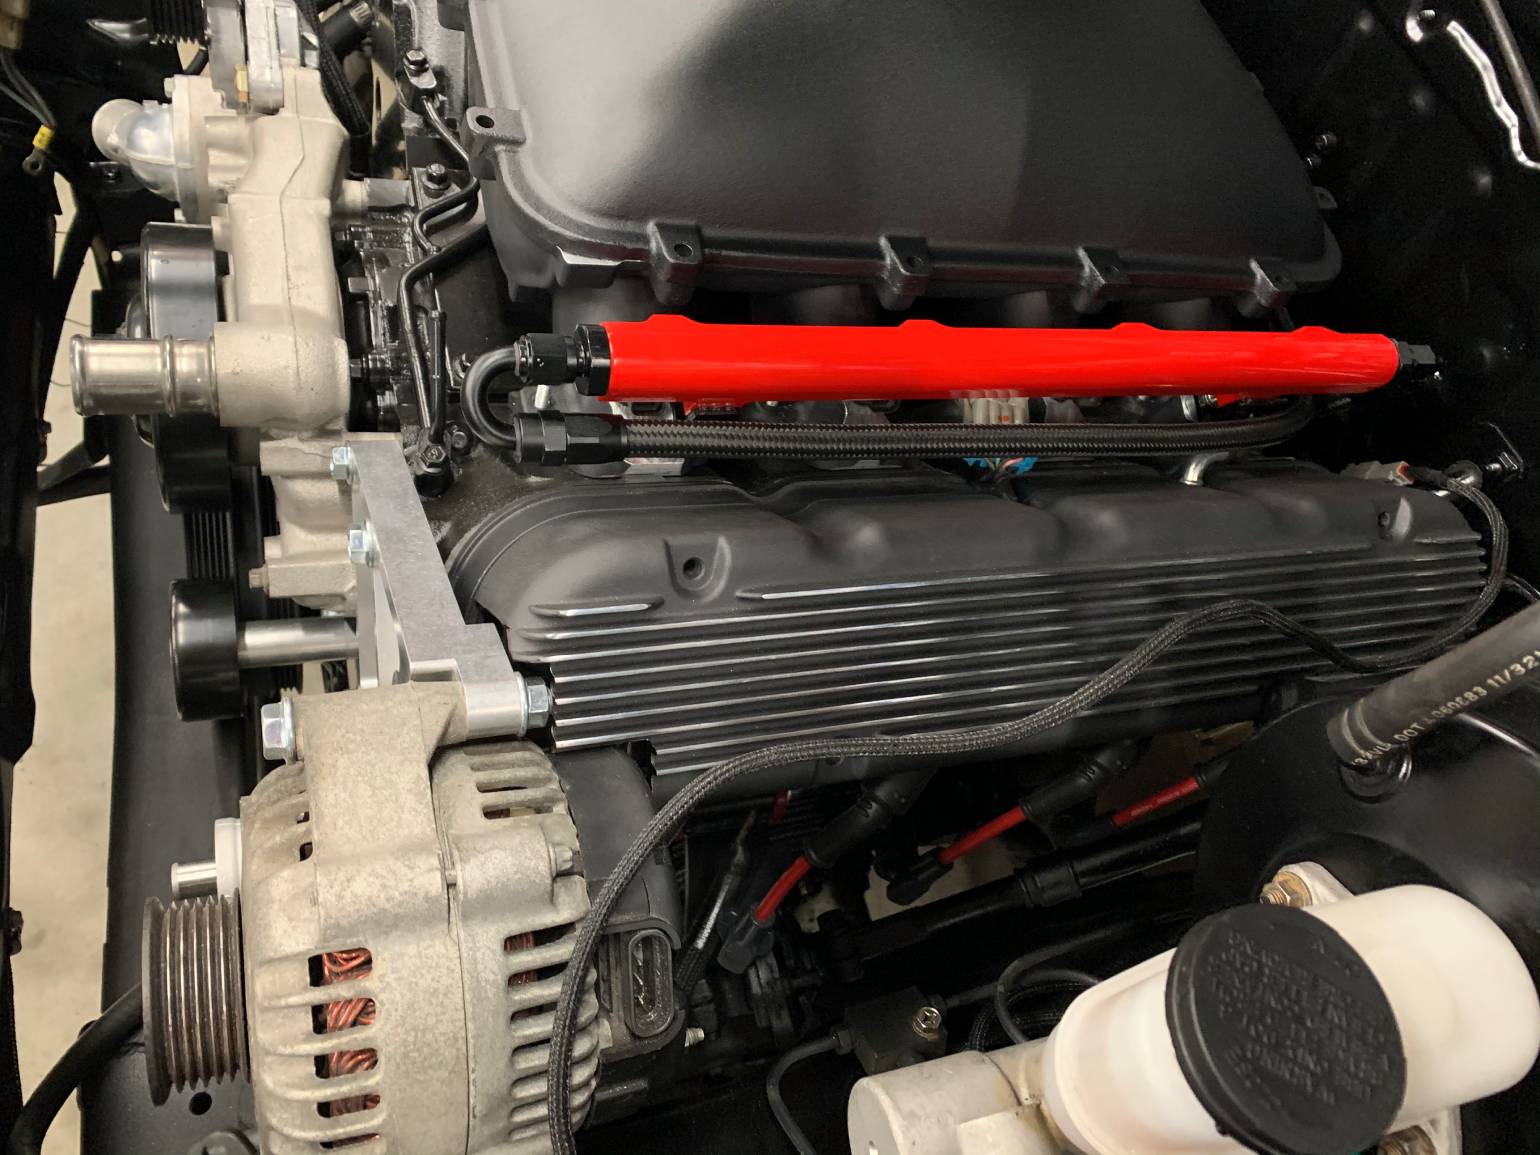 A brand new car part with a red tube